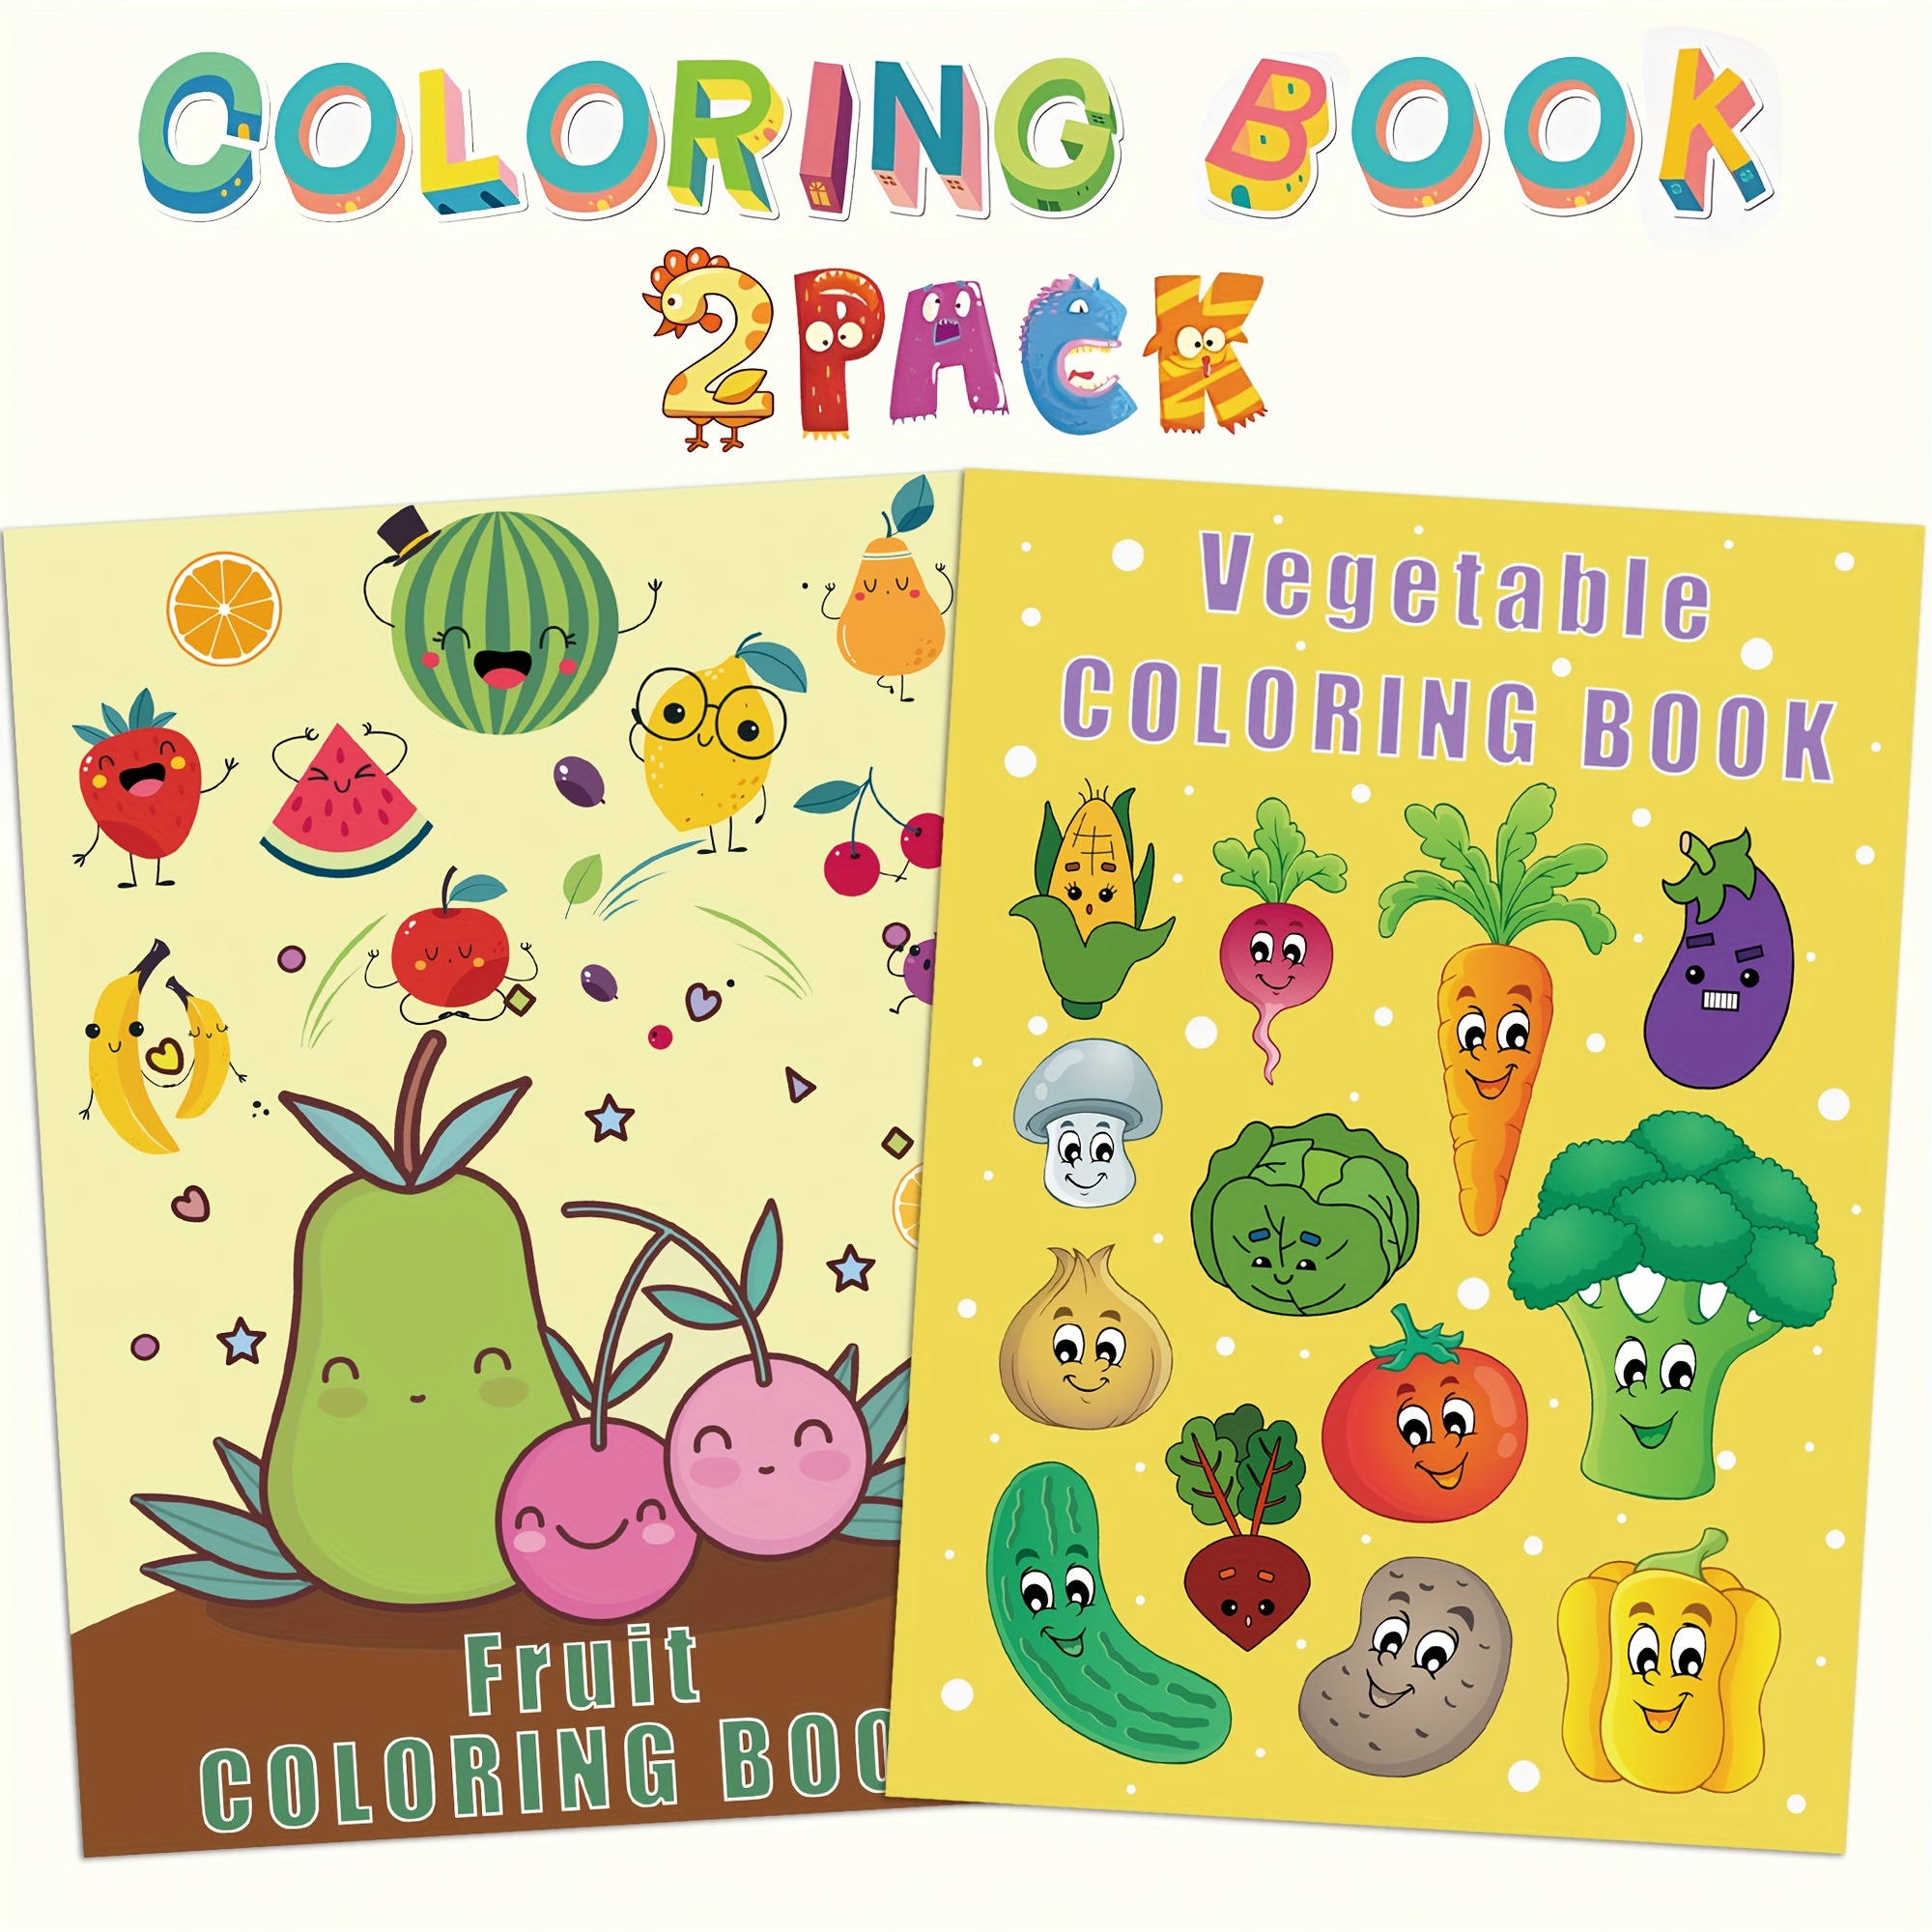  16 Bulk Coloring Books For Kids Ages 4-8 - Assortment Bundle  Of 16 Kids Coloring And Activity Books